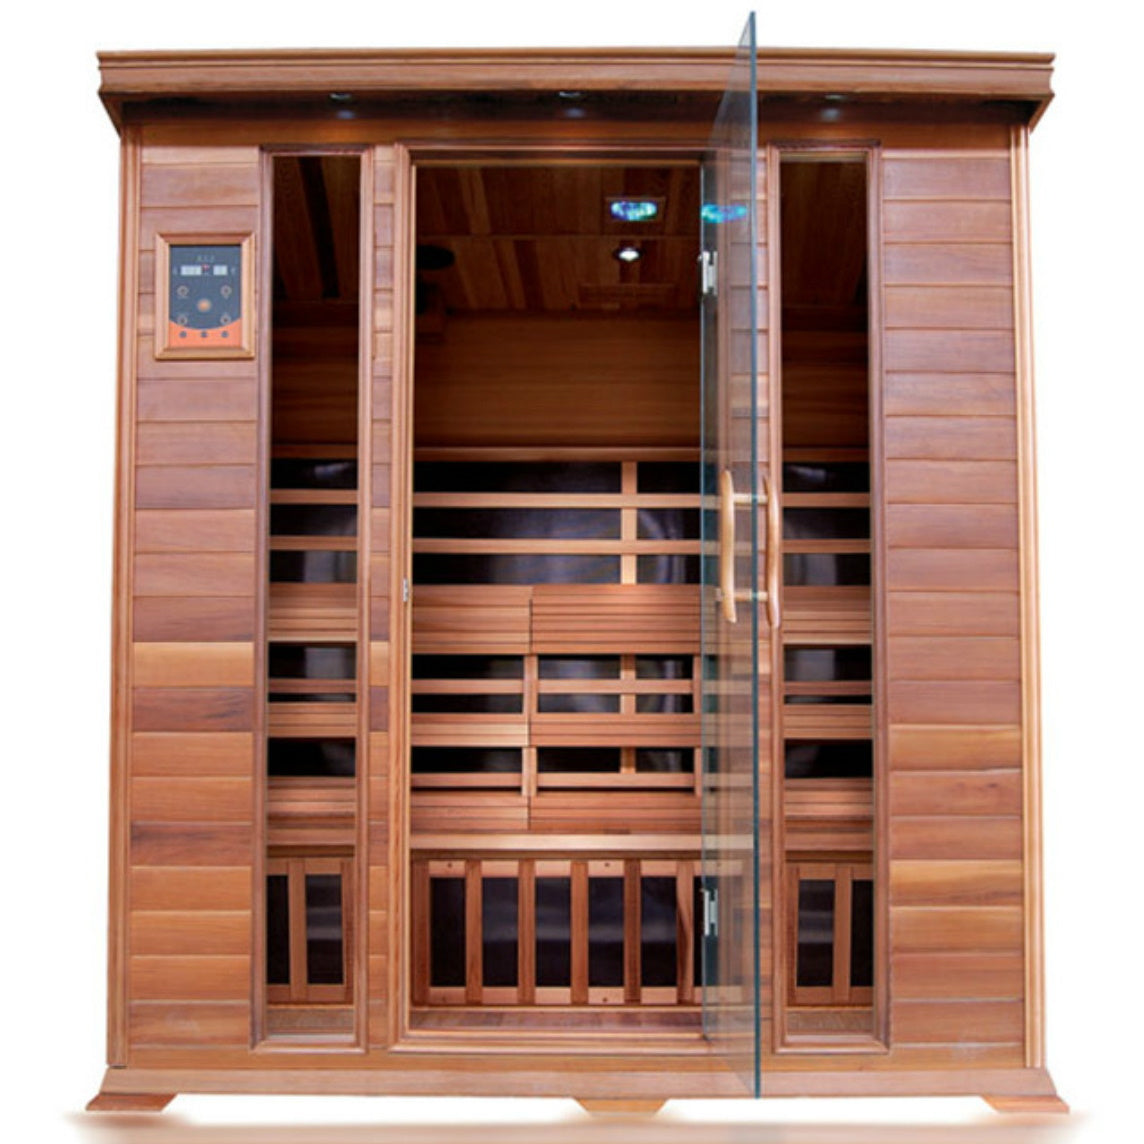 SunRay Sauna  4 Person Sequoia FAR Infrared Sauna - Natural Canadian Red Cedar with glass door, 10 infrared carbon nano heaters, Dual LED control panels, Recessed interior & exterior lighting, LED Reading Lamp - HL400K